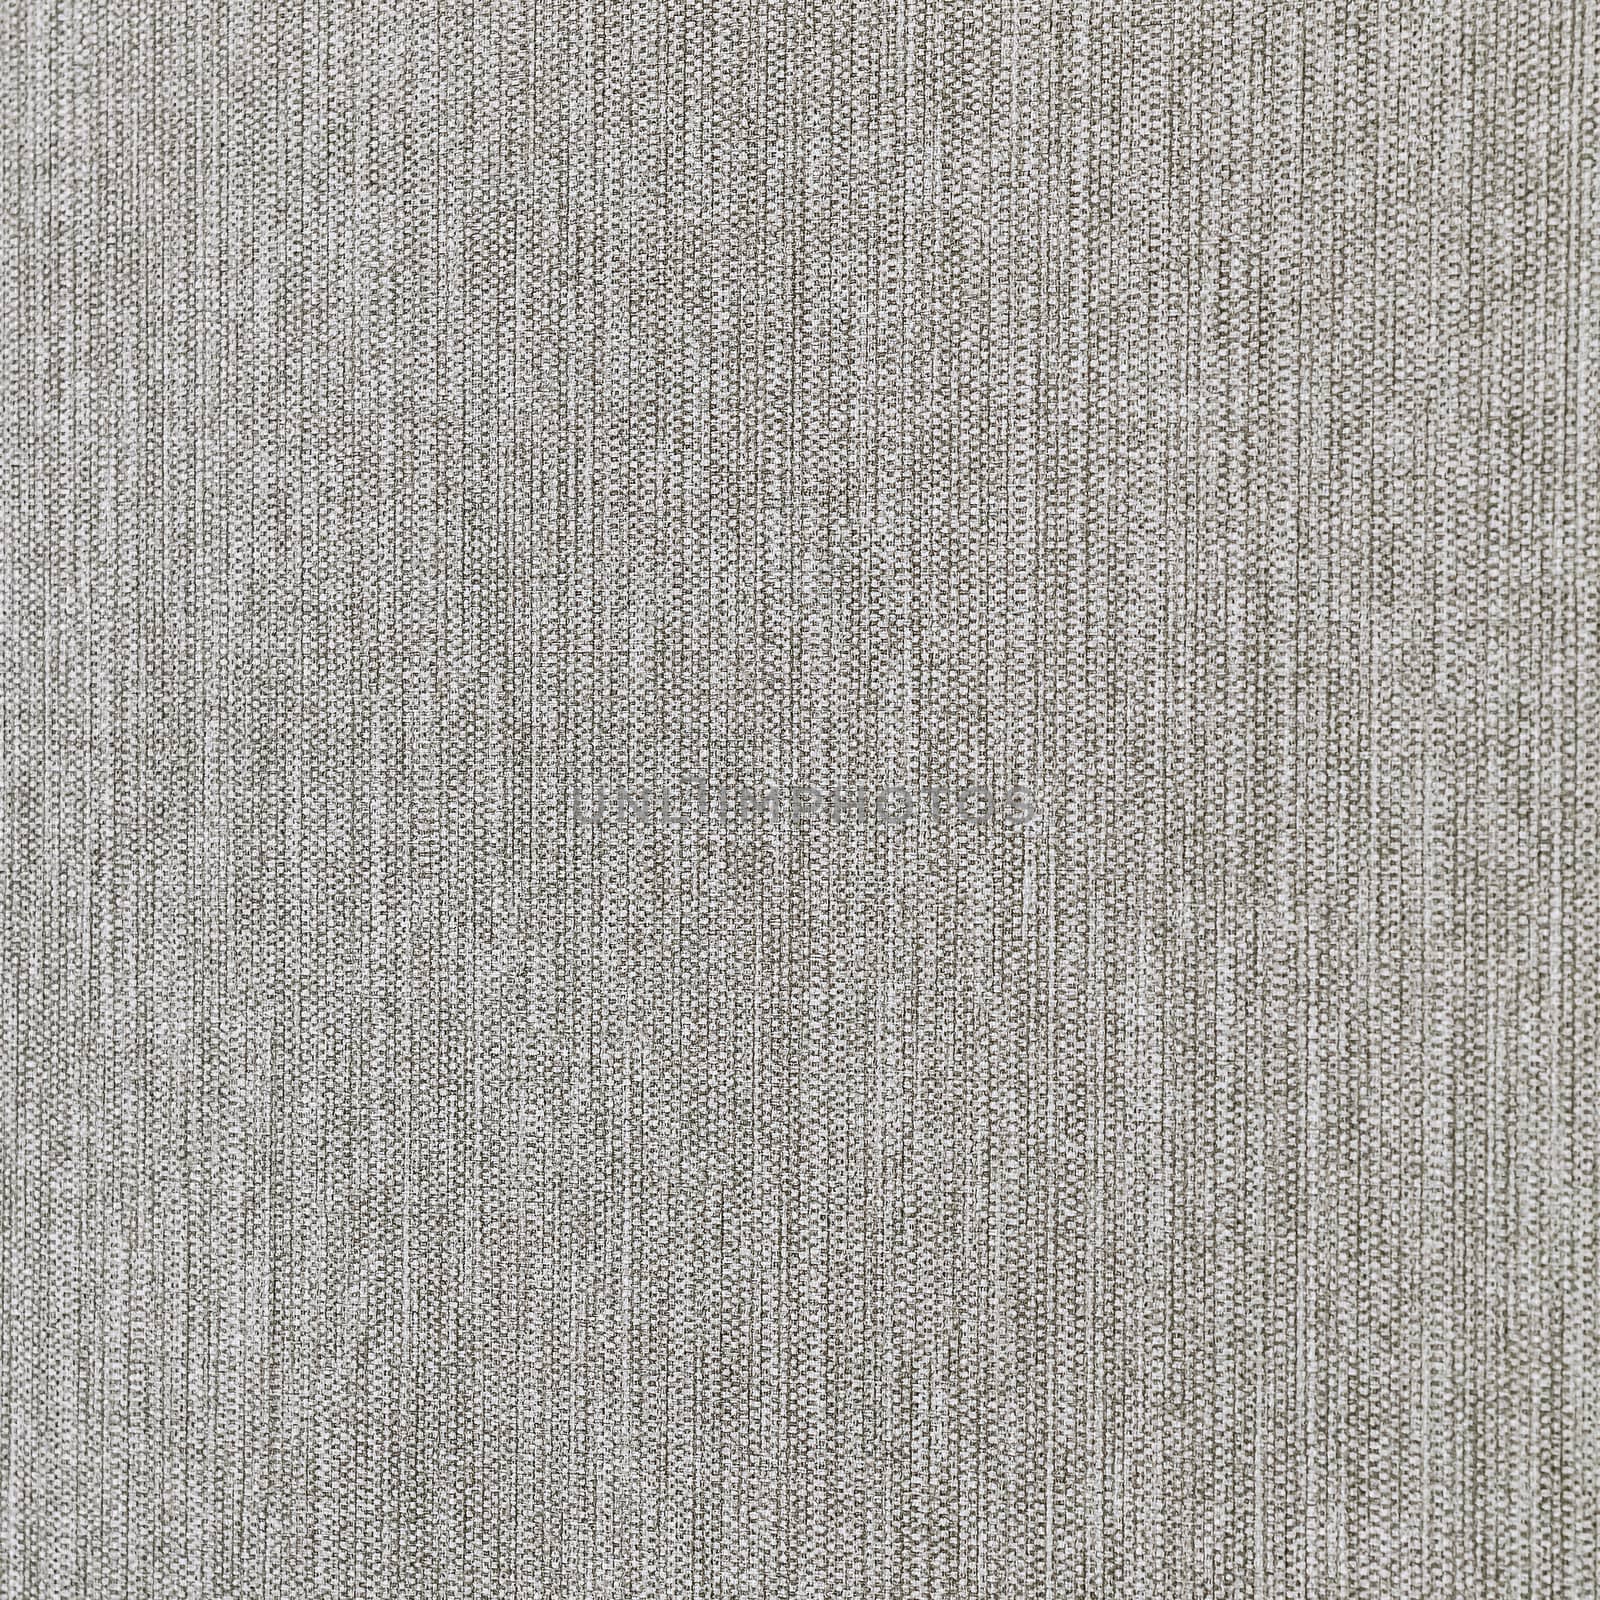 Taupe abstract grungy decorative texture. Textured paper with copy space. Motley gray-brown paper surface, texture closeup.